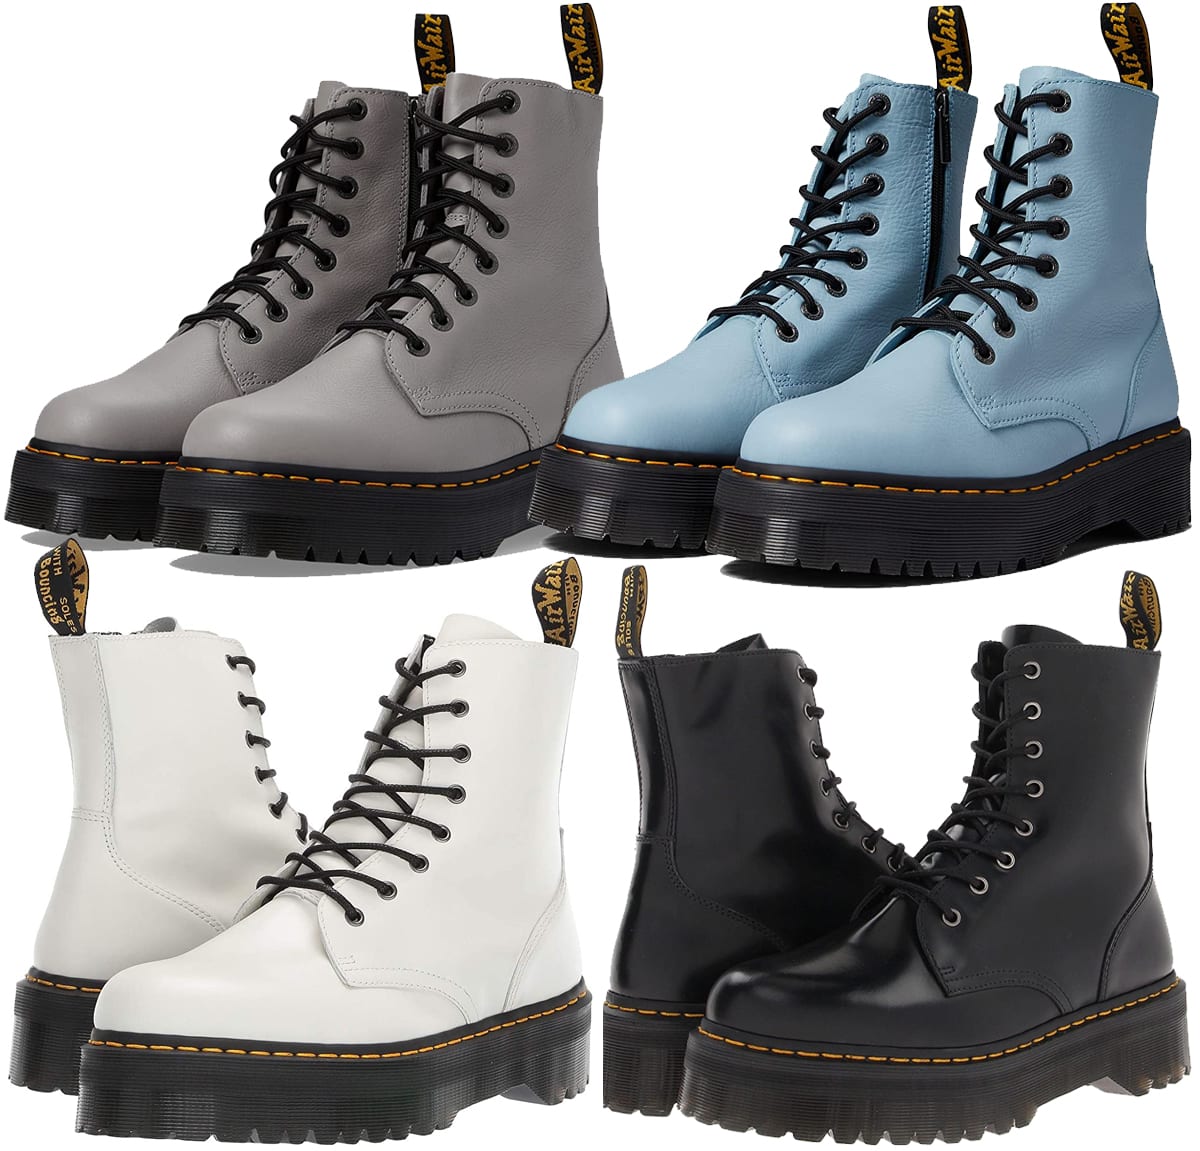 Nevelig vitaliteit Standaard The 6 Most Iconic Dr. Martens Boots That Will Never Go Out of Style